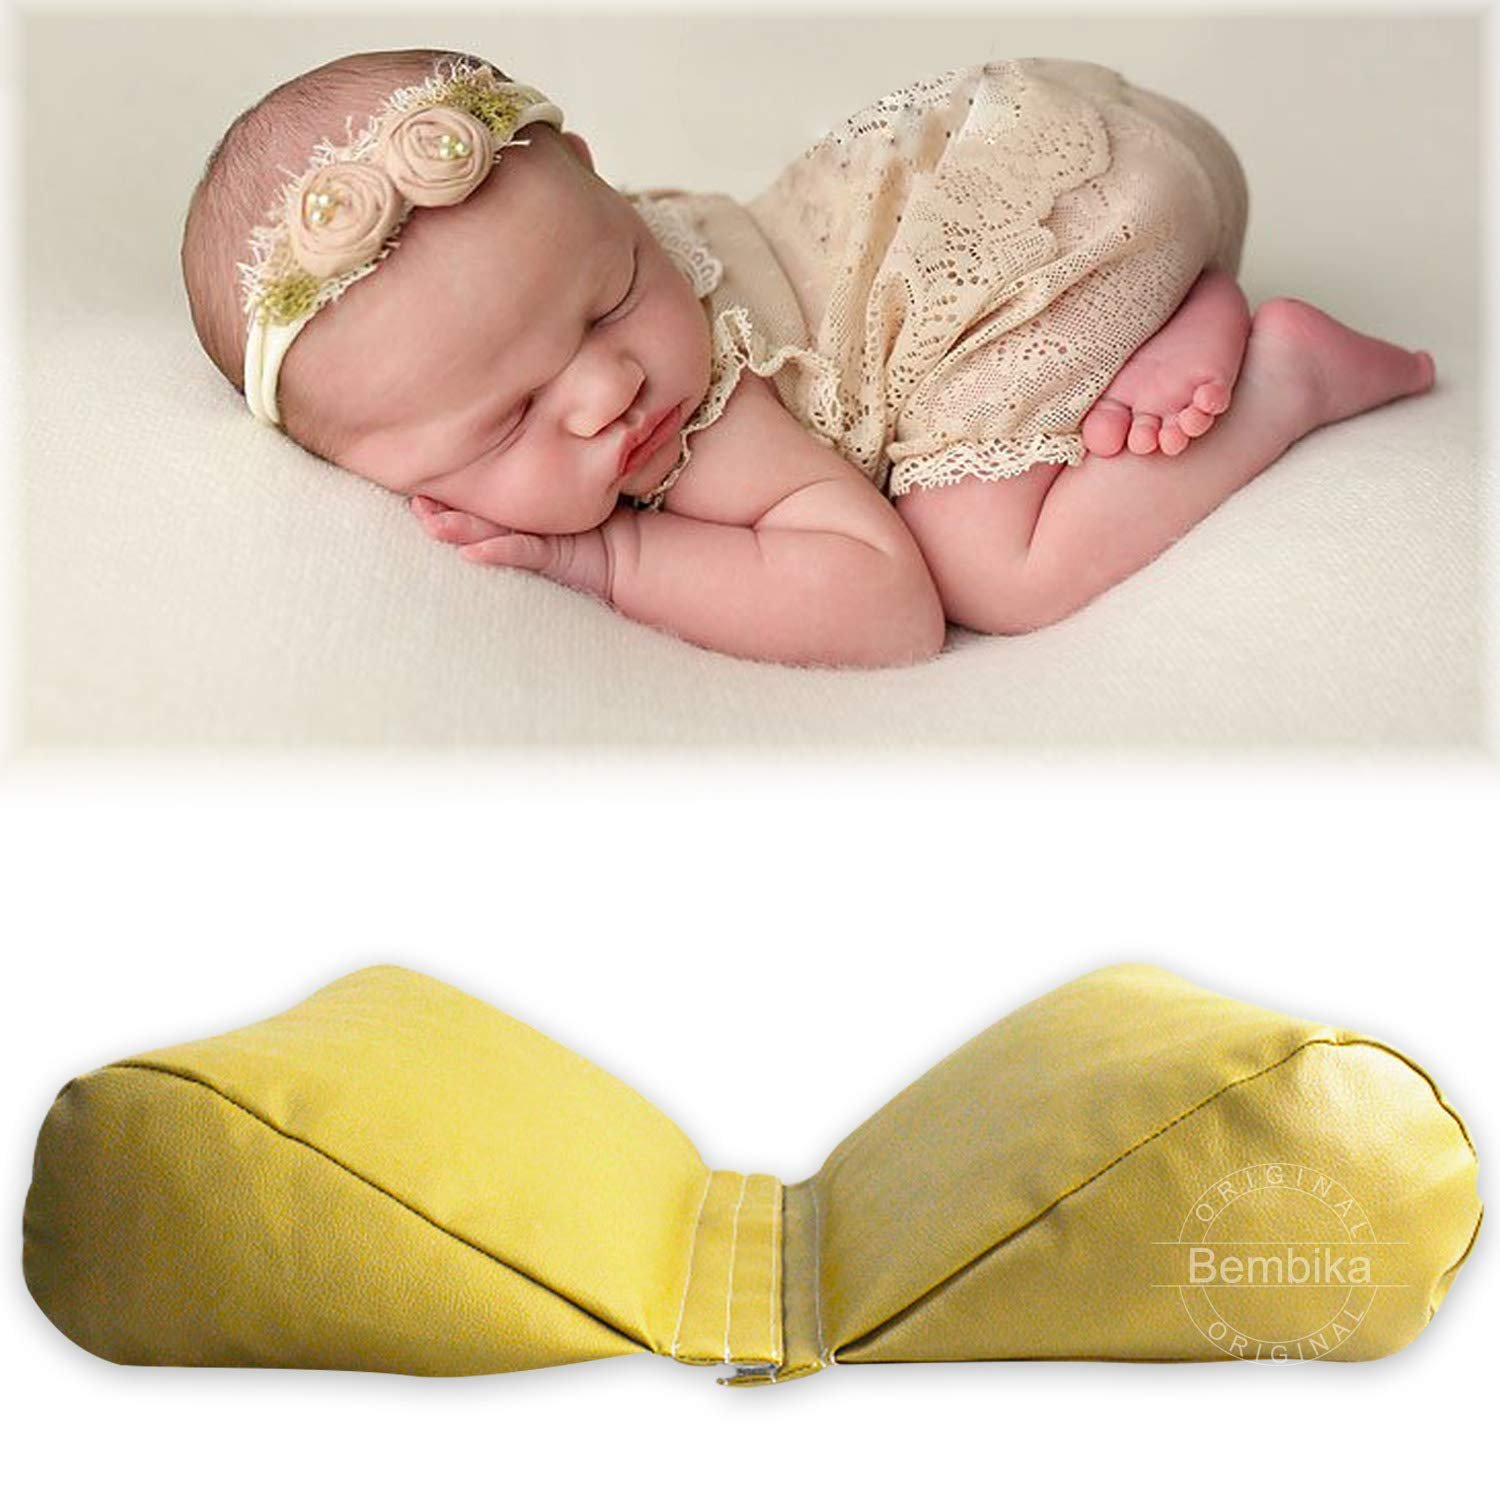 First Landings Newborn Posing Pillows - Photography Props for Baby Boy or  Girl Photoshoots - Donut Pillow and 3 Posing Pillows Photography Pillow Set